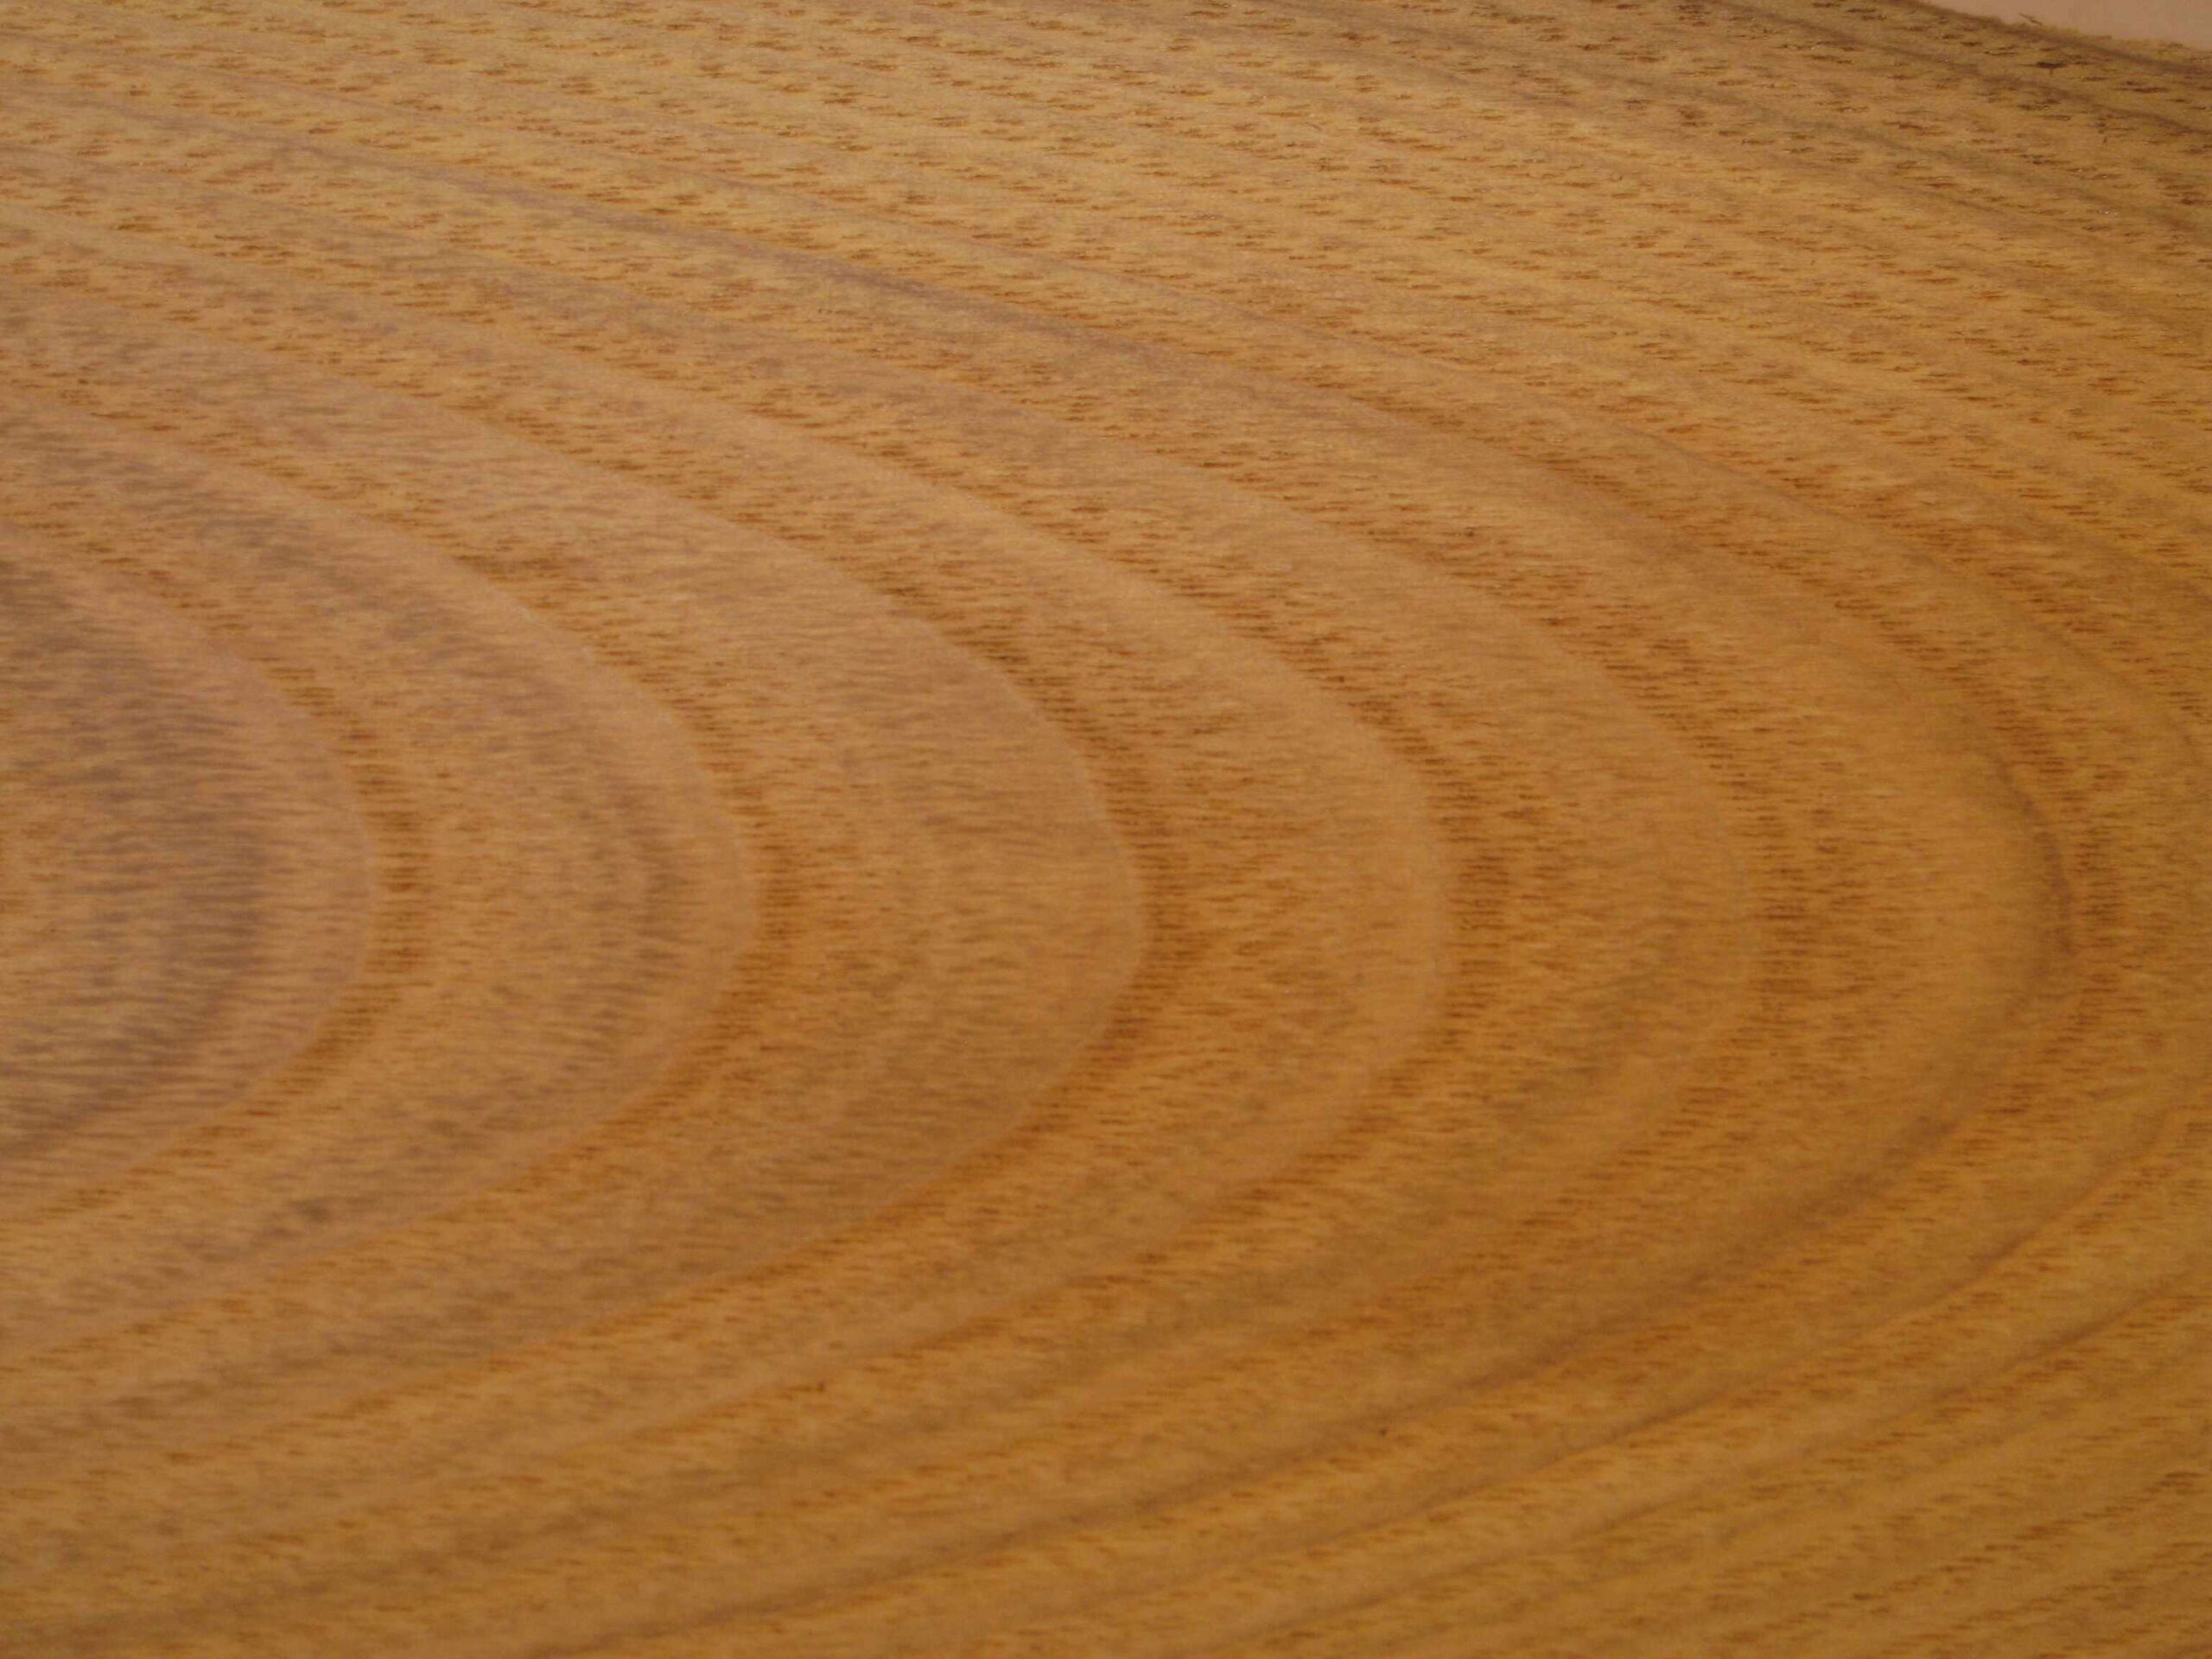 close up photograph of the face grain of a board of american chestnut wood